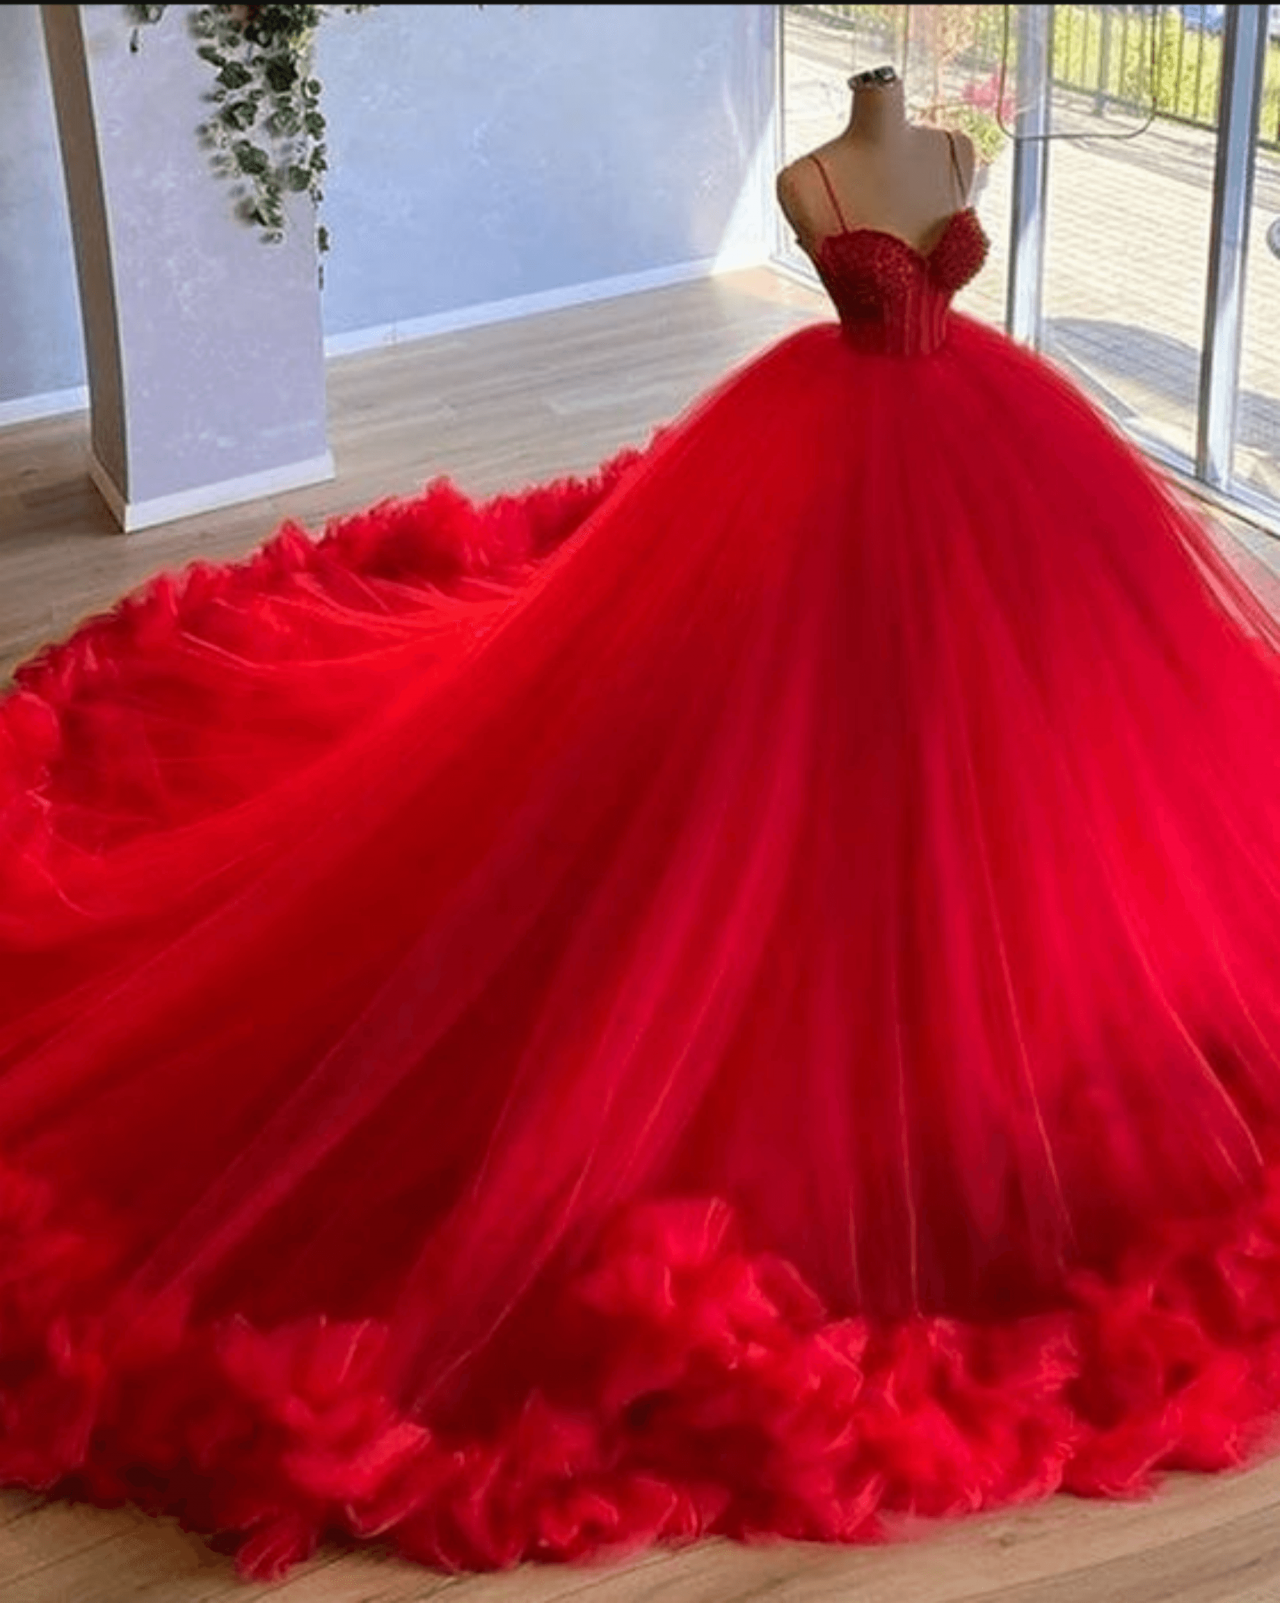 Beauty Spaghetti Straps Red Beading Bodice Tulle Ball Gown Evening Dress